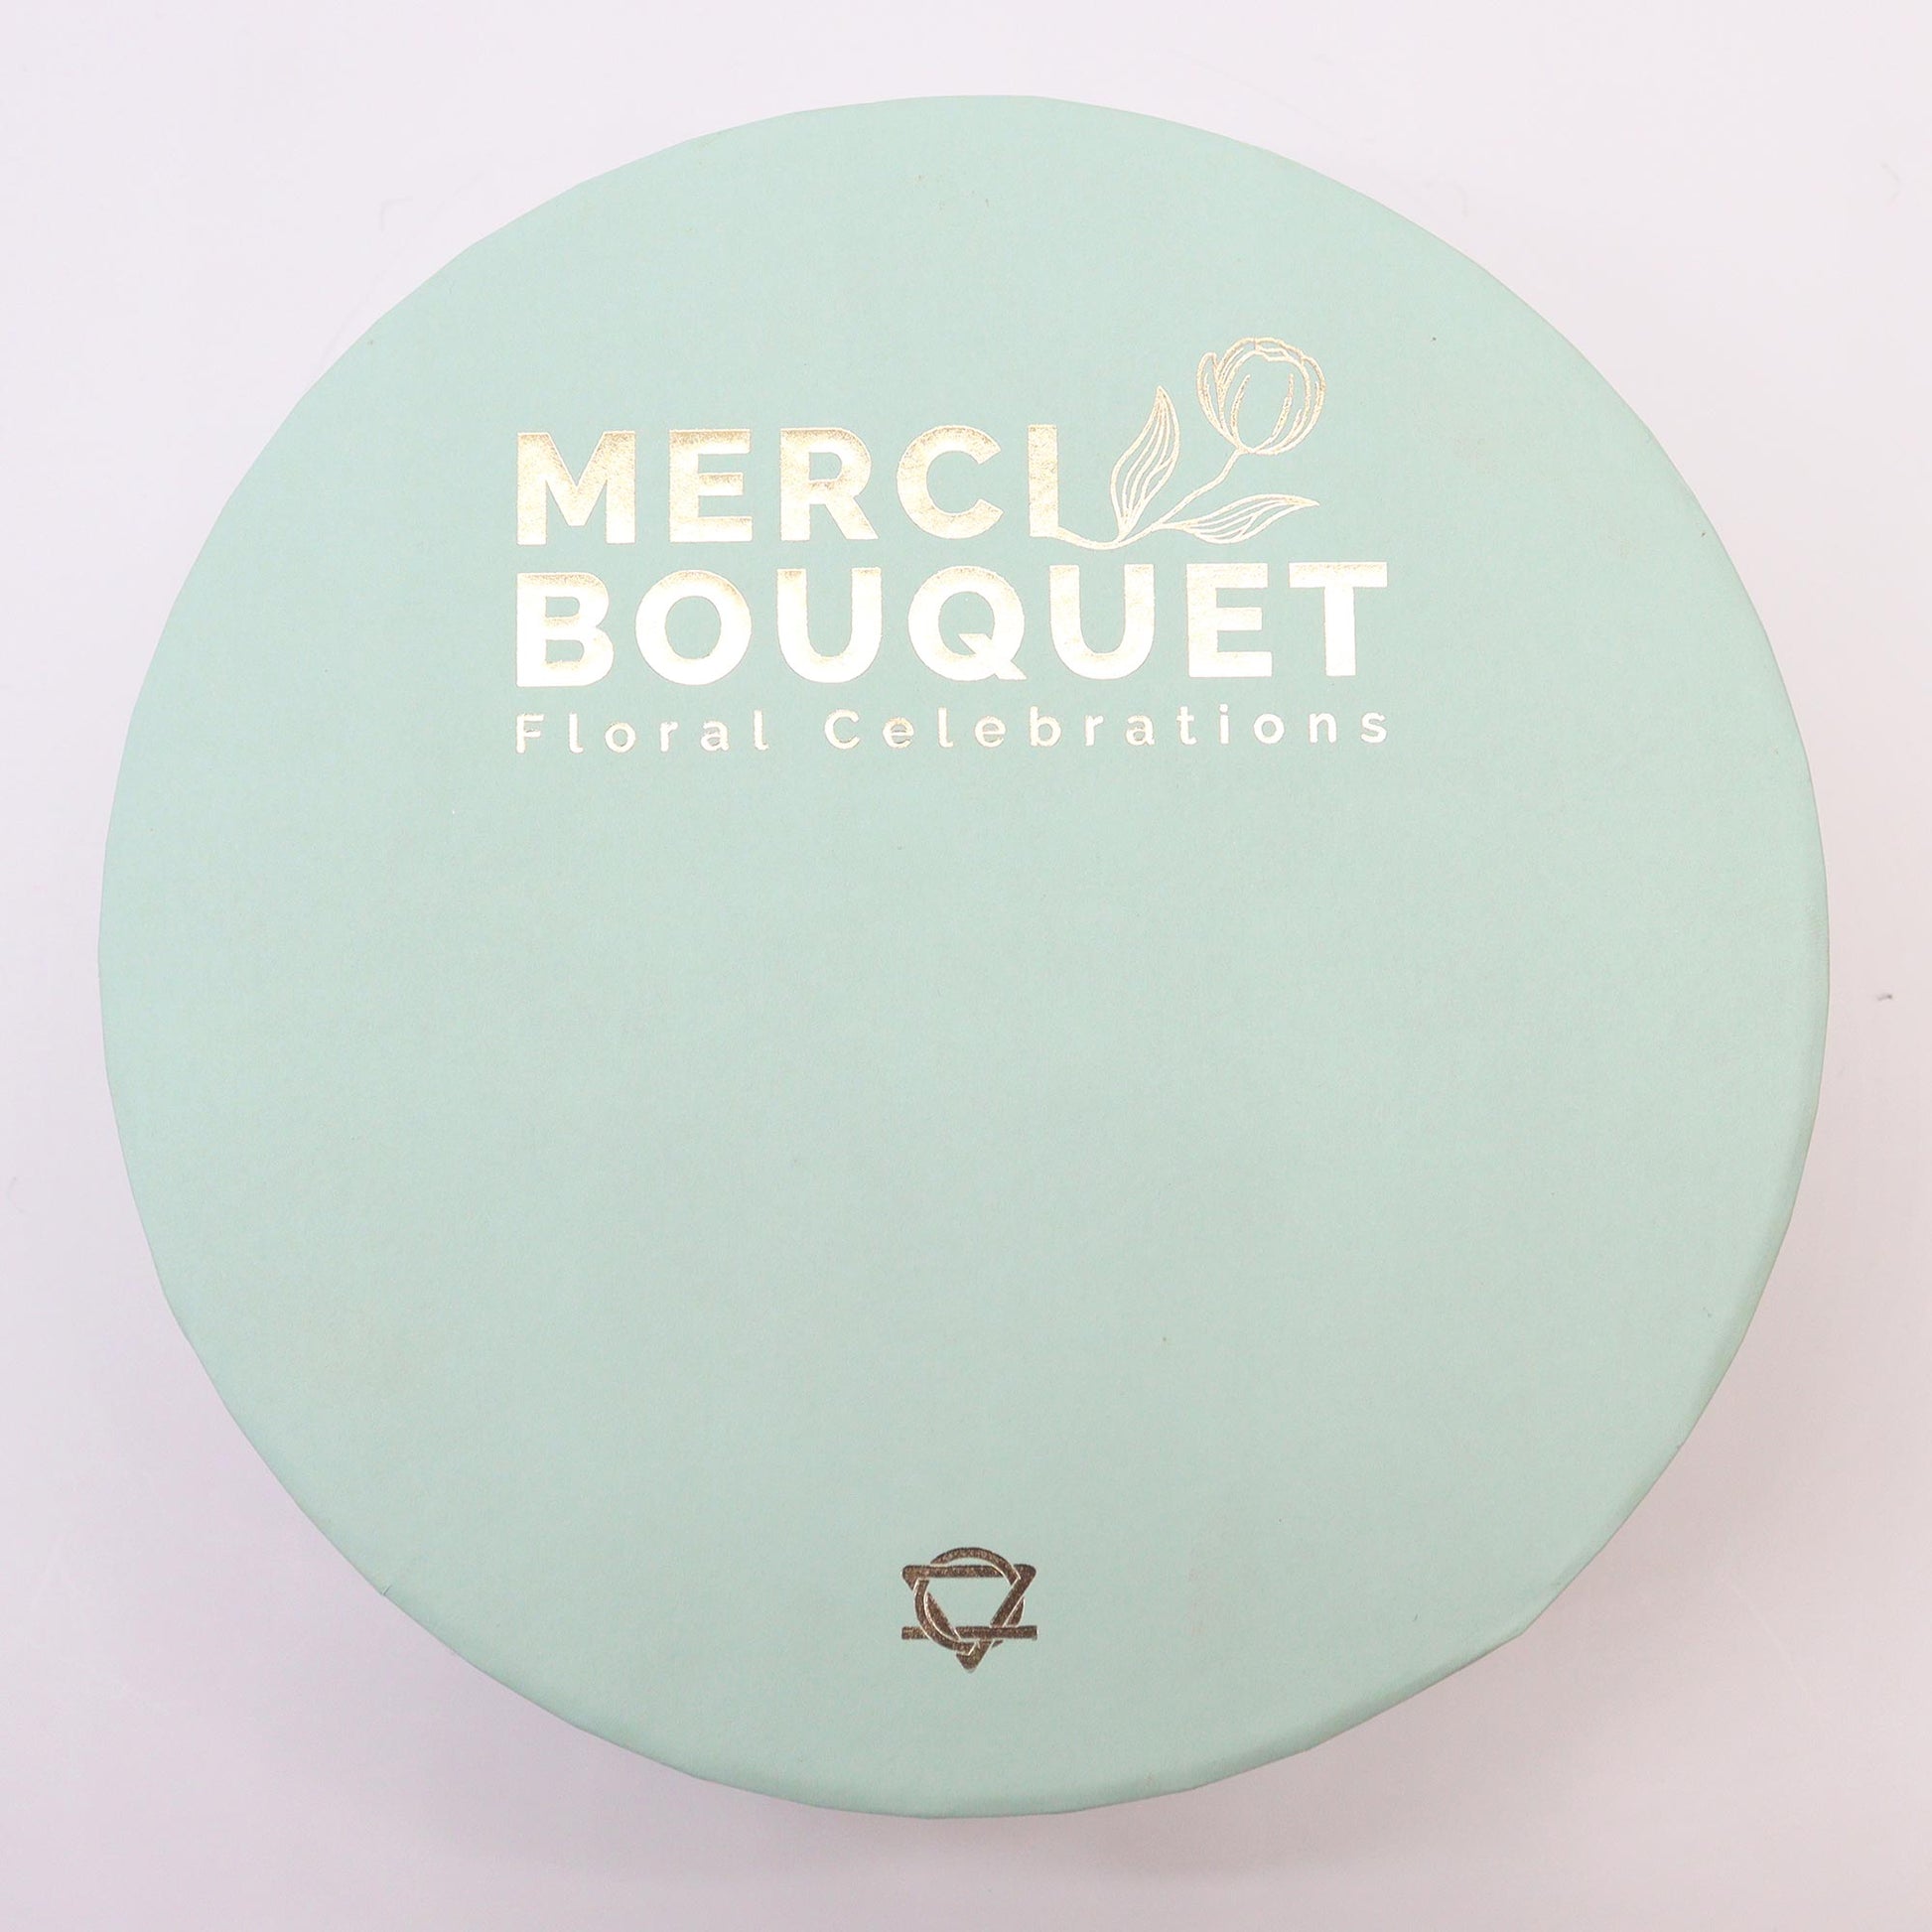 A green hatbox lid, with a white title saying Merci Bouquet Floral Celebrations. Inside the hat box are soap Roses and carnations in yellows, pinks, whites, and greens. A lovely gift for any celebration.